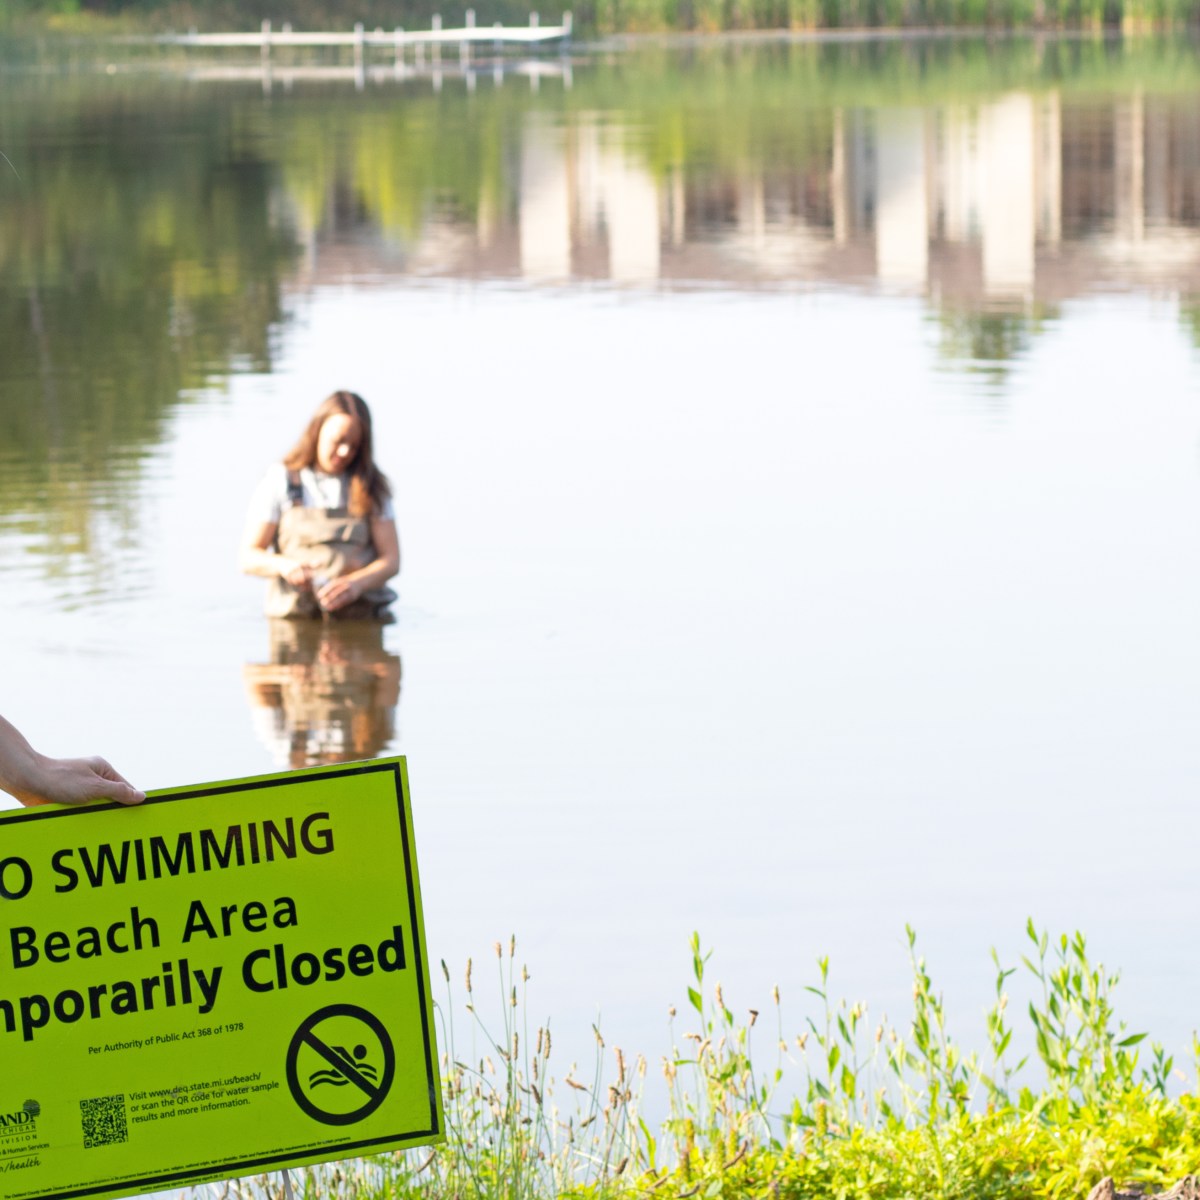 Lake with sign in ground that says "no swimming beach area temporarily closed"